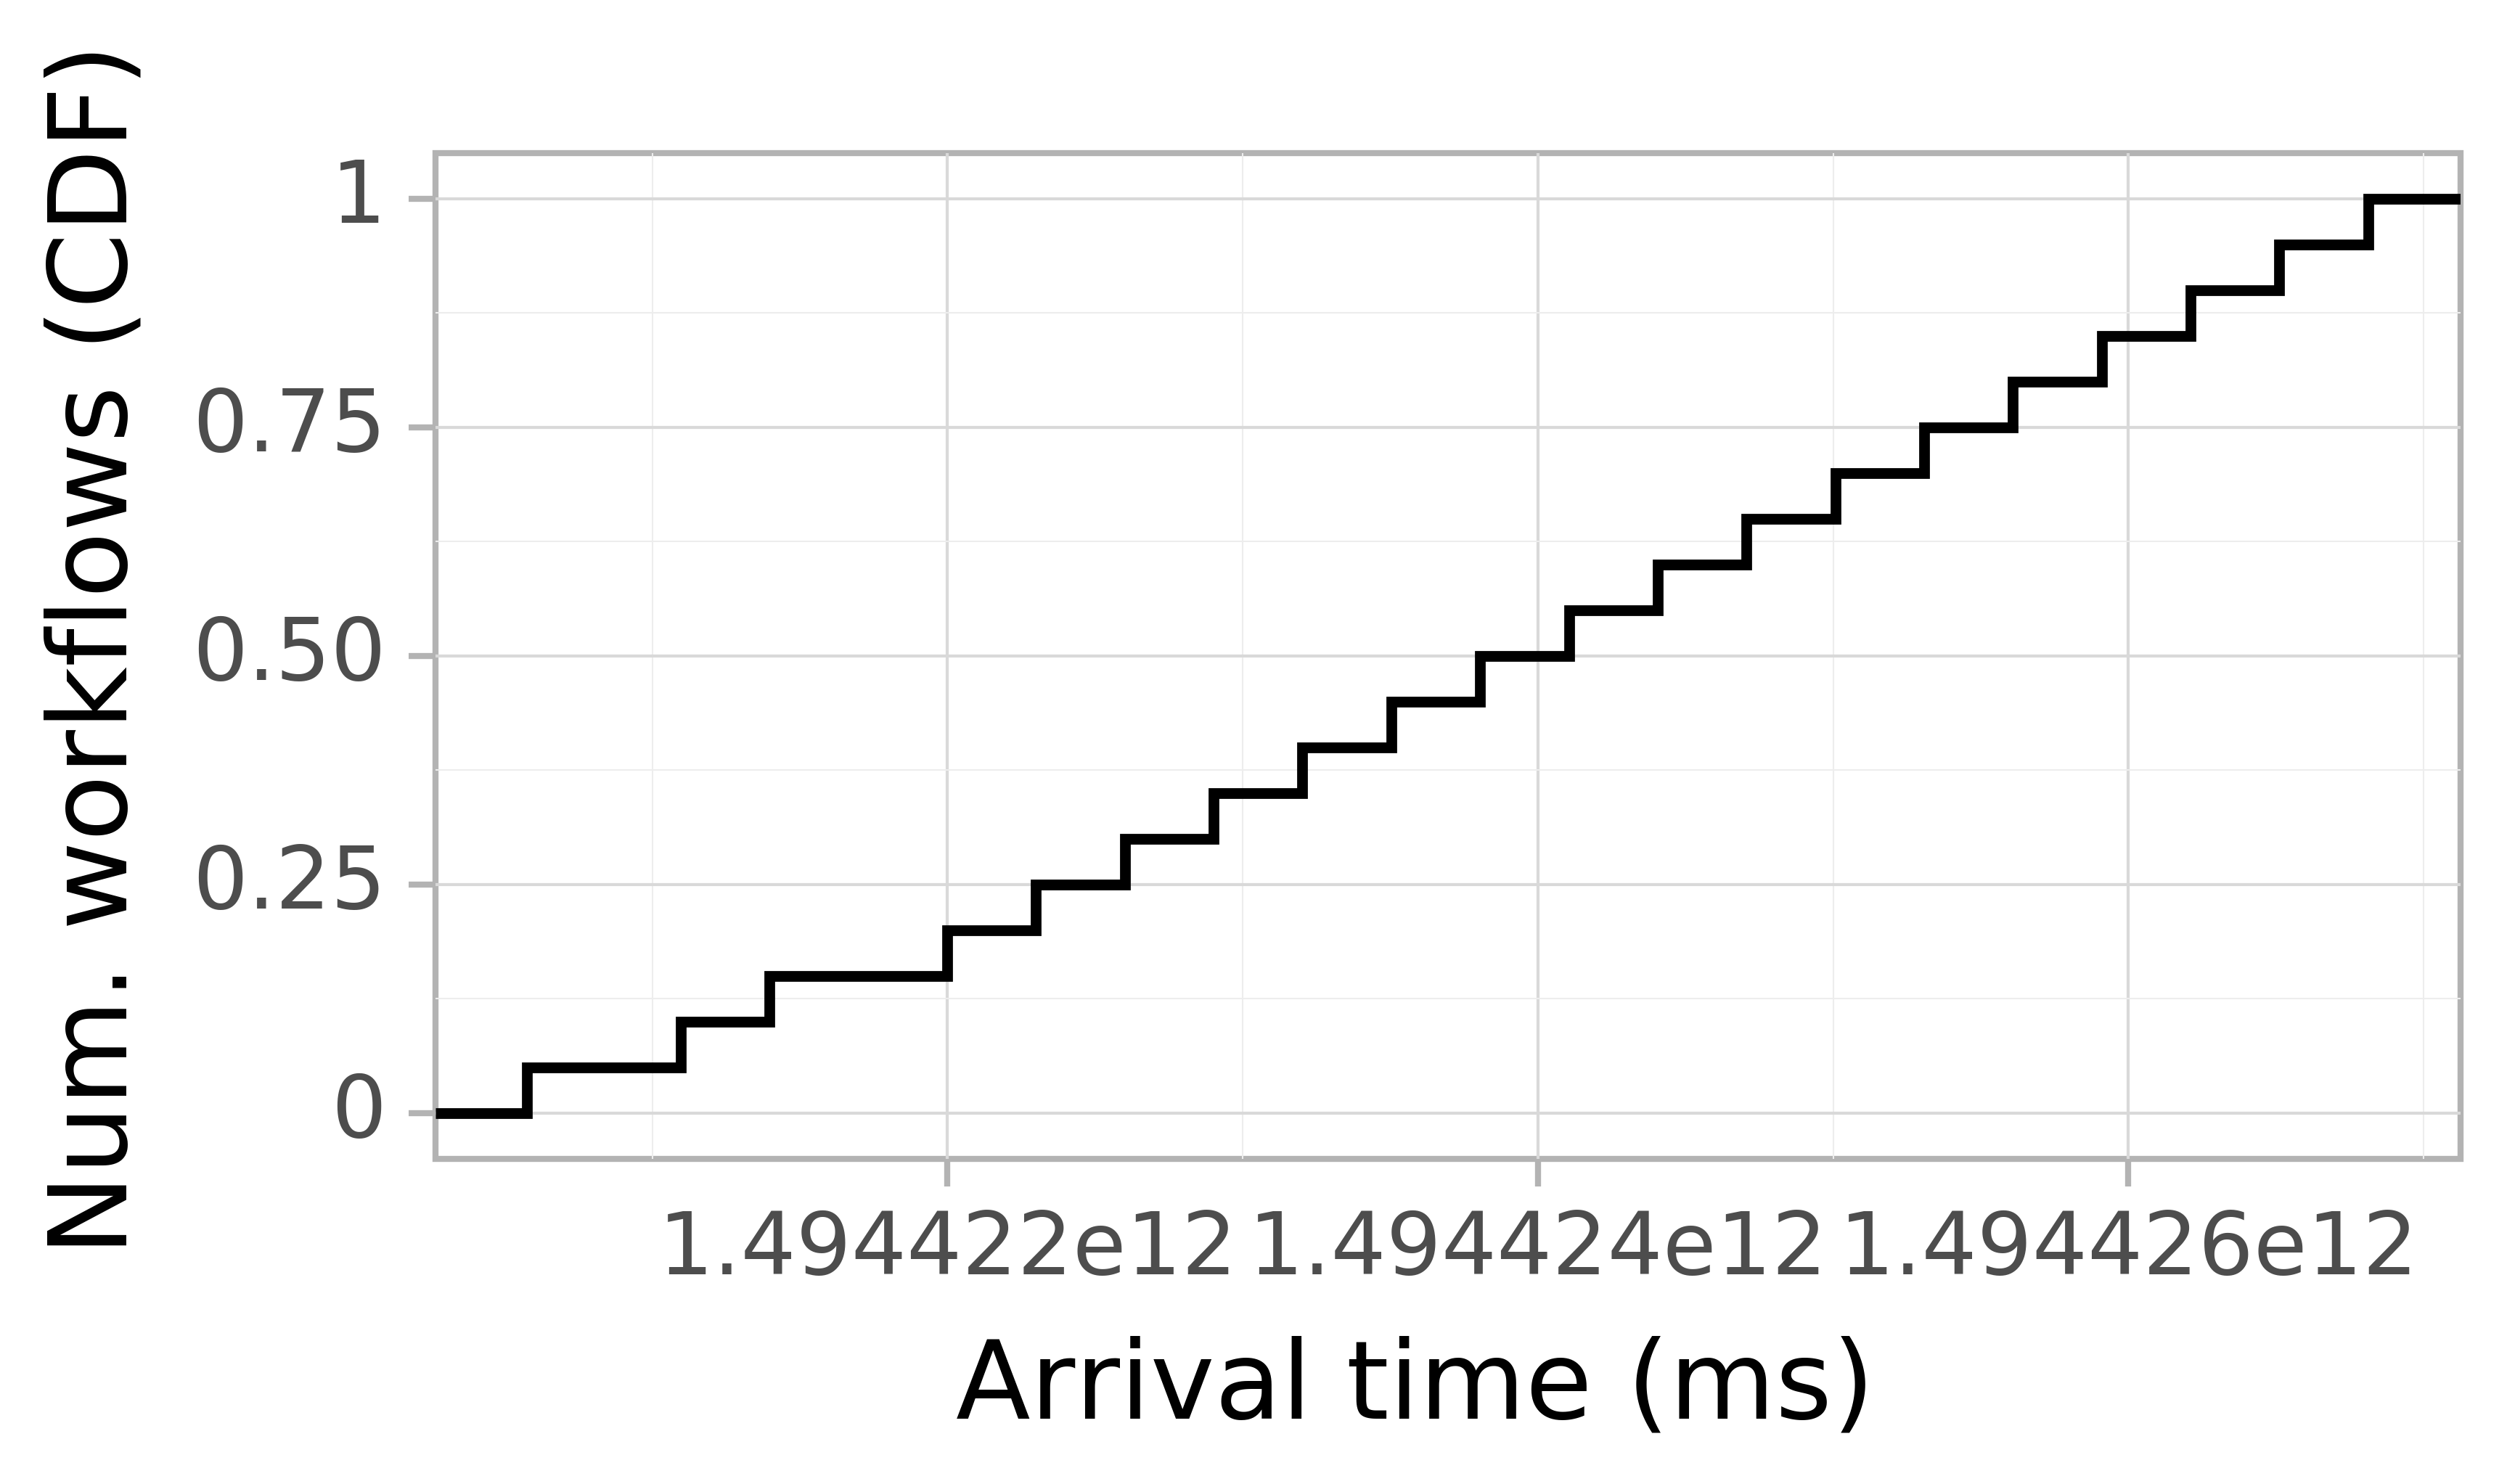 Job arrival CDF graph for the askalon-new_ee44 trace.